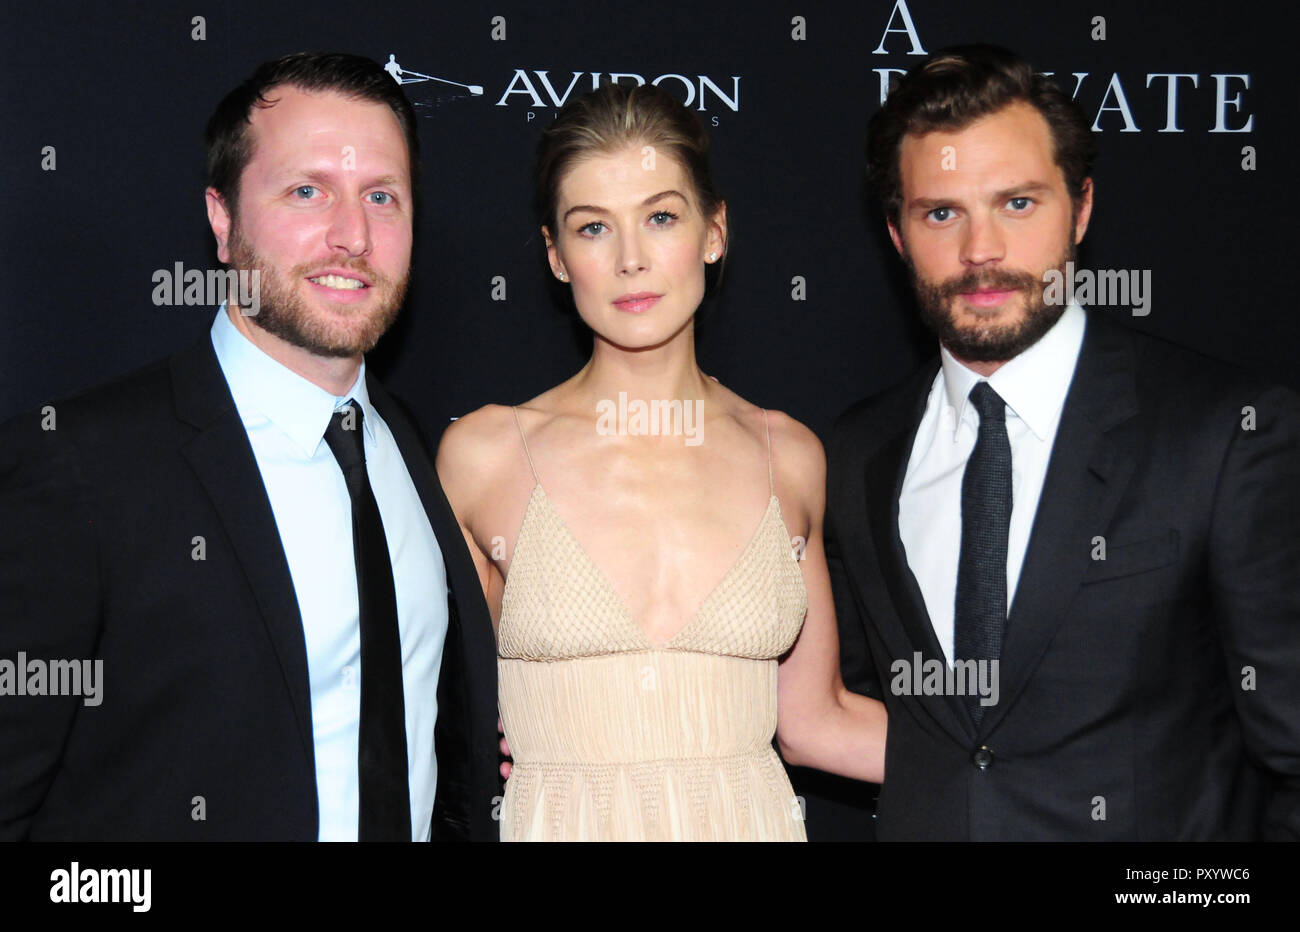 Beverly Hills, California, USA. 24th October, 2018. Director Matthew Heineman, actress Rosamund Pike and actor Jamie Dornan attend the Los Angeles Premiere of Aviron Pictures' 'A Private War' at Samuel Goldwyn Theater in Beverly Hills, California. Photo by Barry King/Alamy Live News Stock Photo